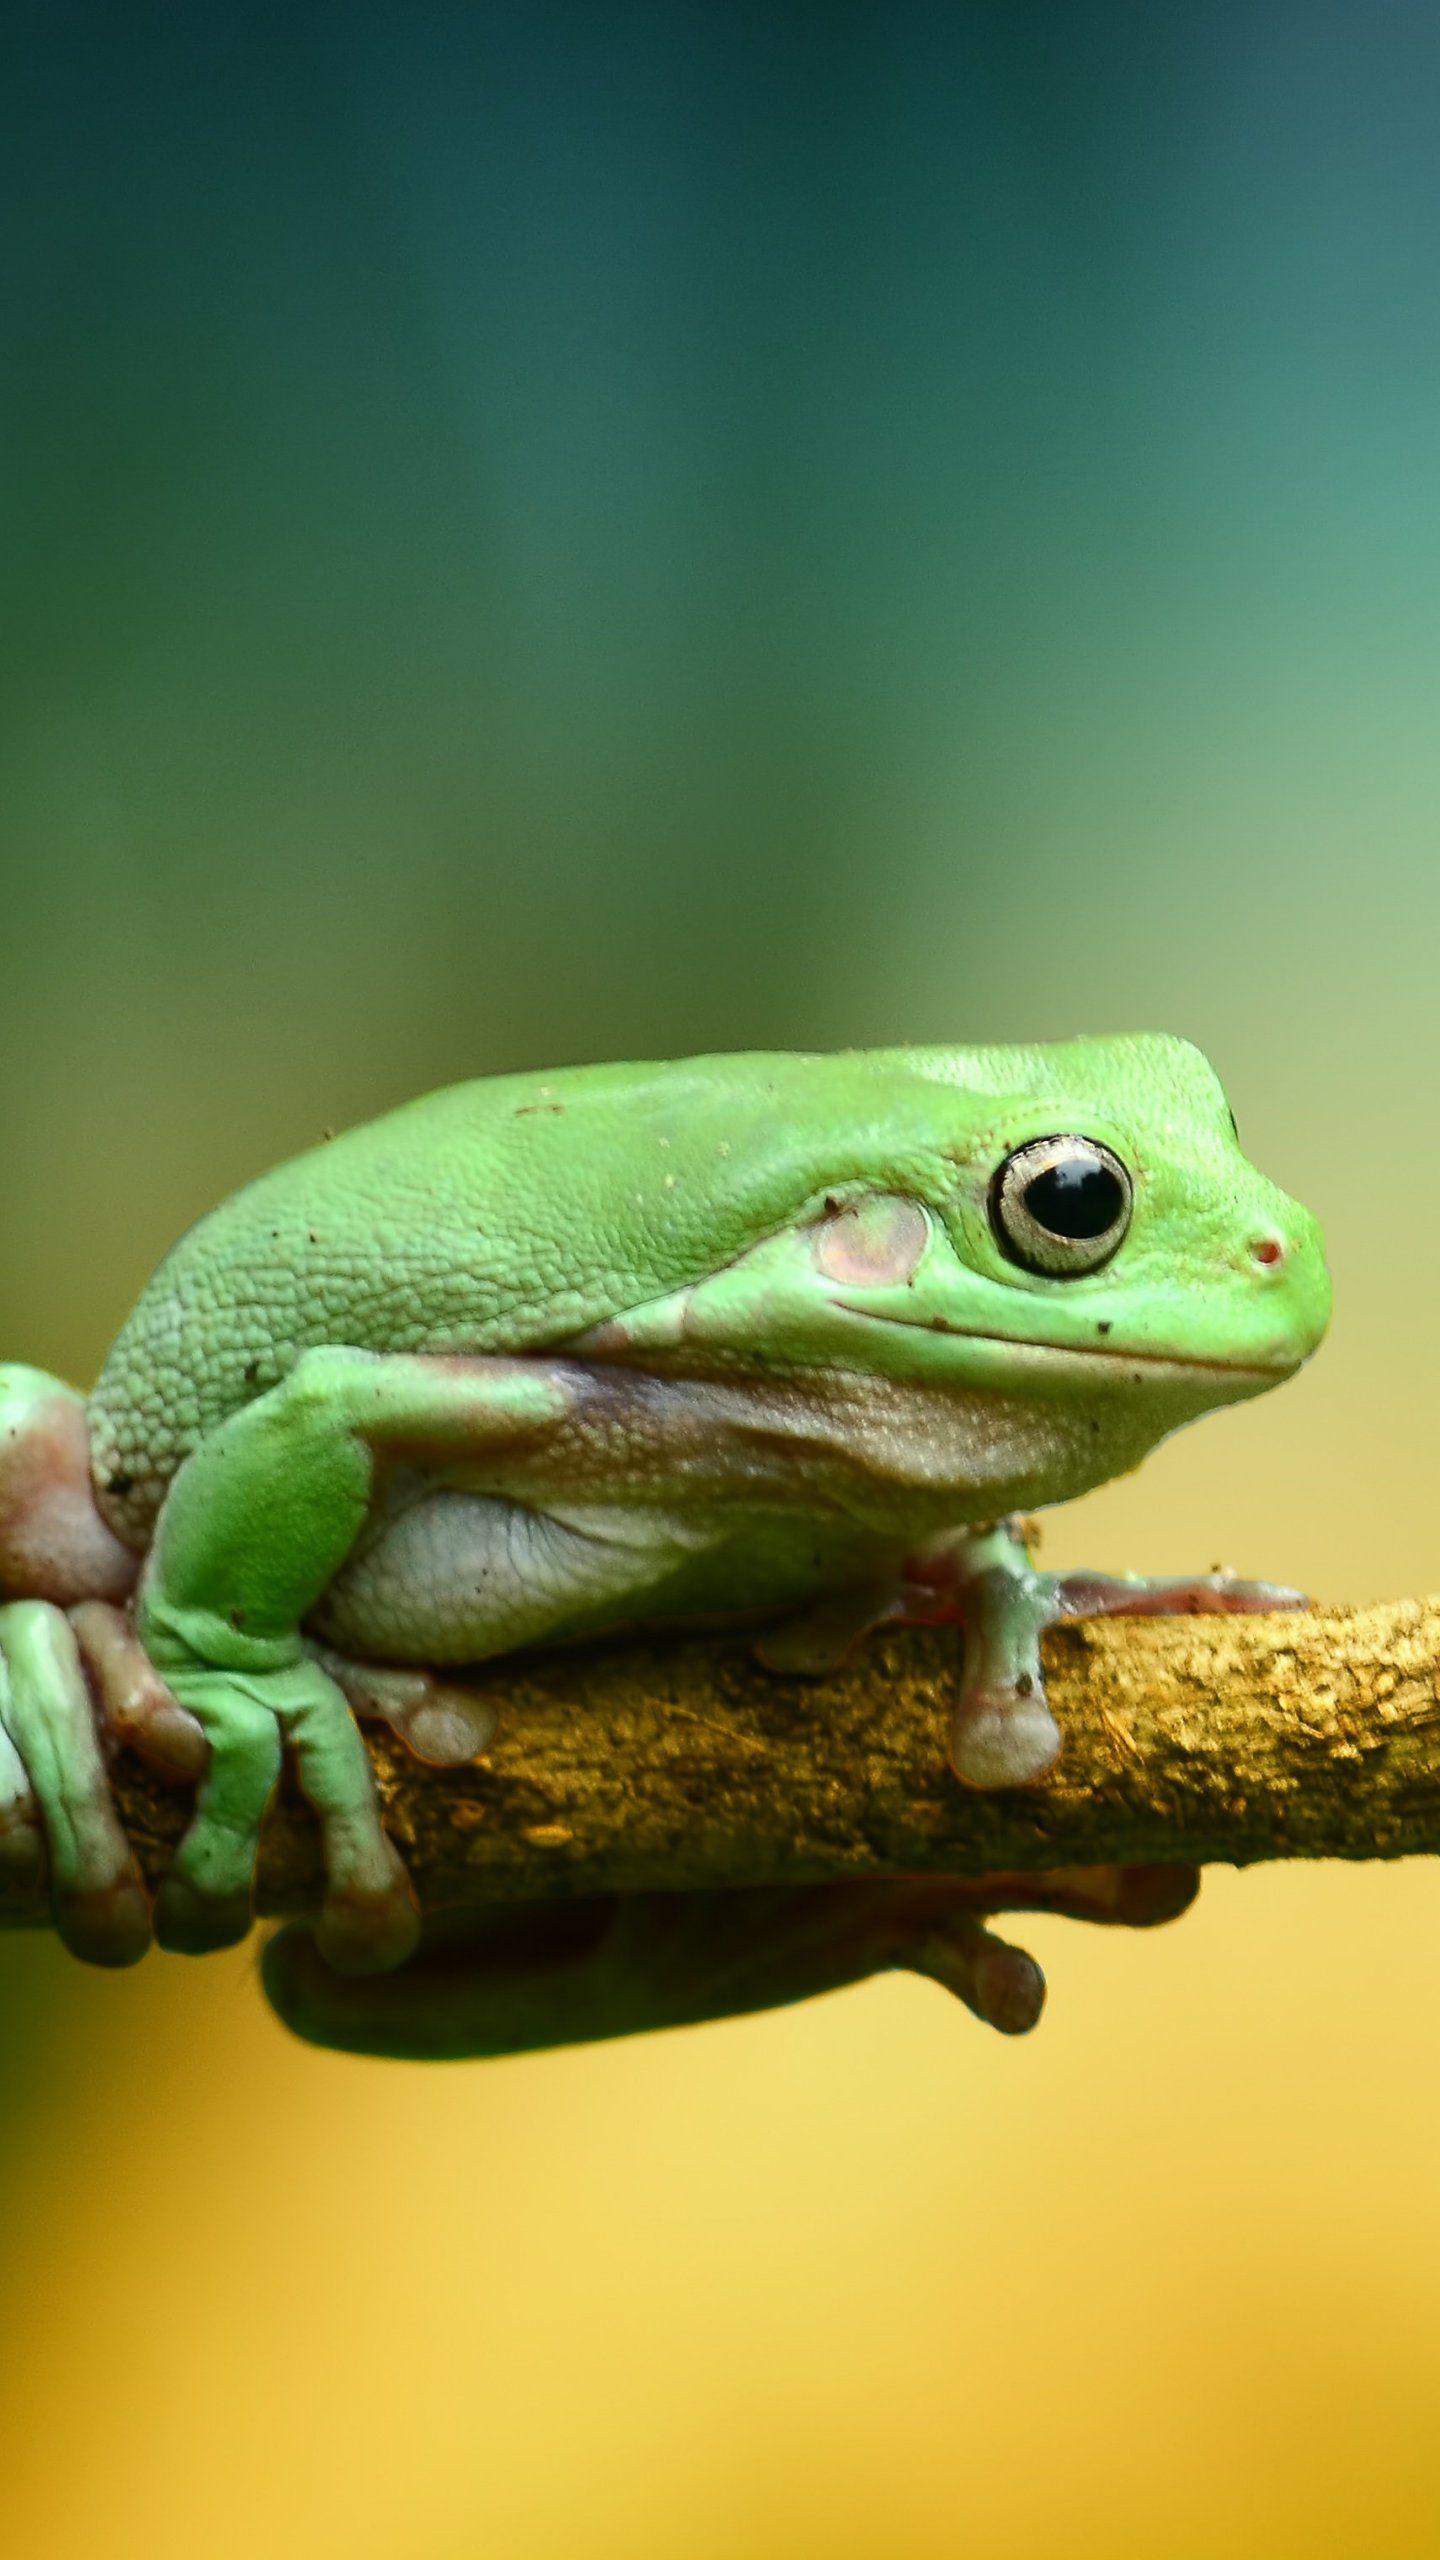 ƑTAP AND GET THE APP Art Creative Nature Frog Green Red Eyes iPhone 6  Plus  Frog  iPhone  iphone love Green Tree Frog HD phone wallpaper   Pxfuel